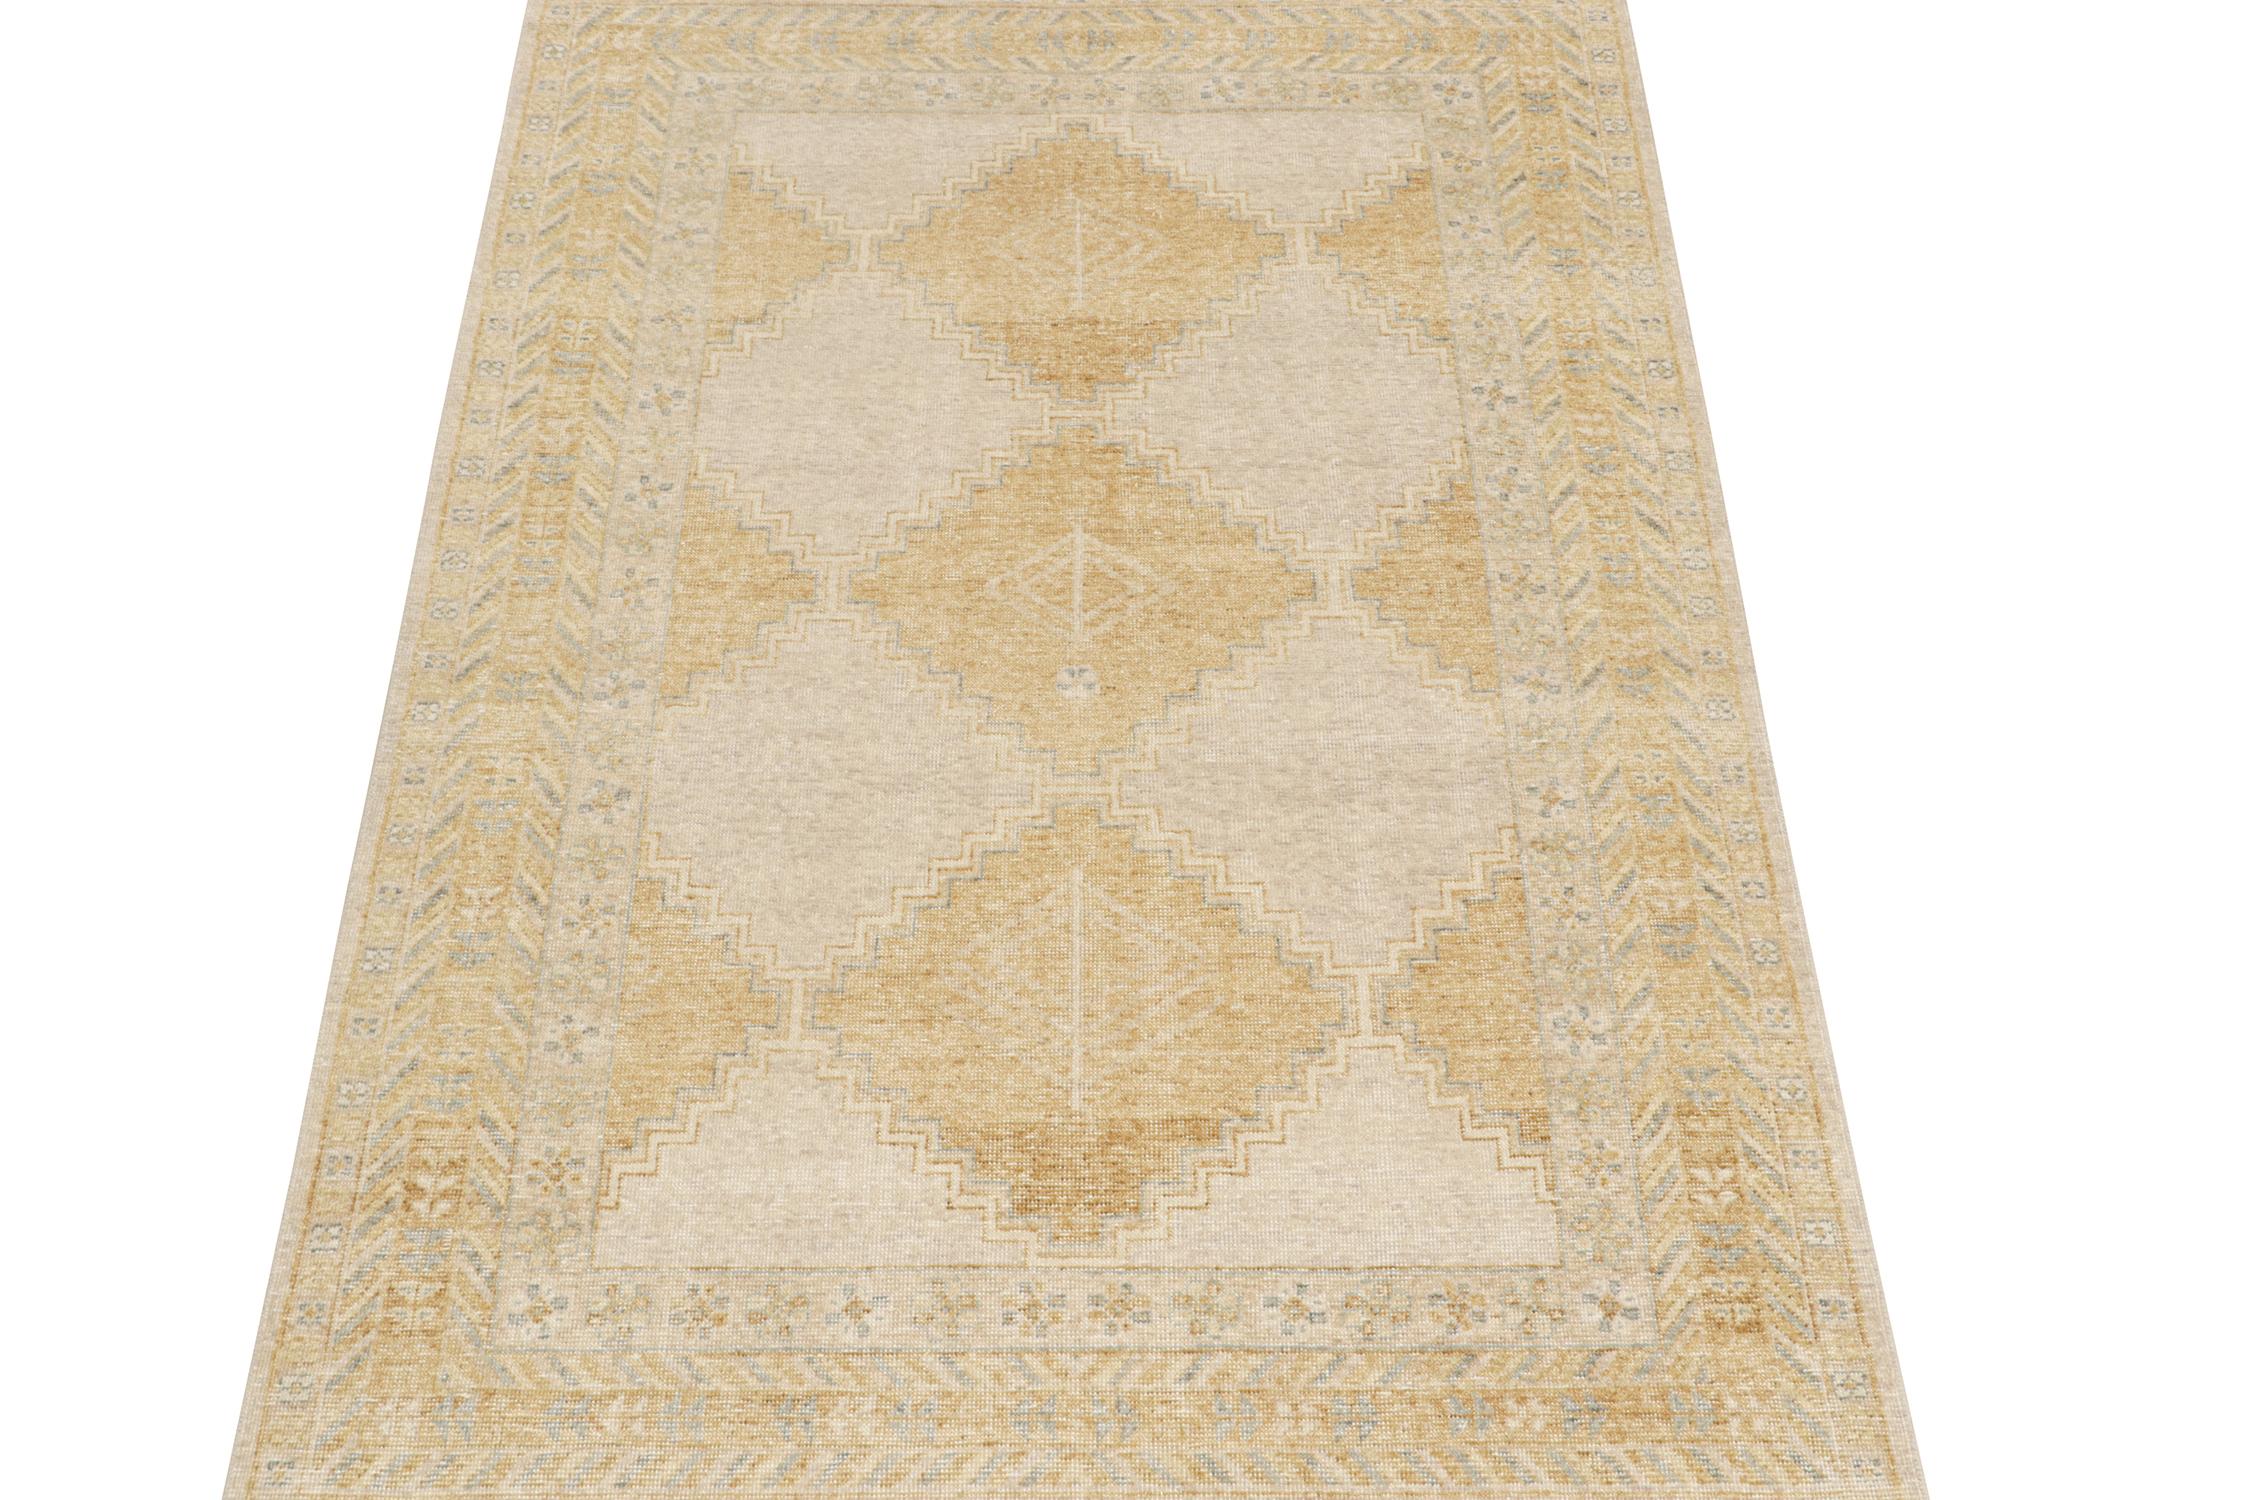 Indian Rug & Kilim’s Distressed Tribal style rug in Gold, Gray and Blue Patterns For Sale